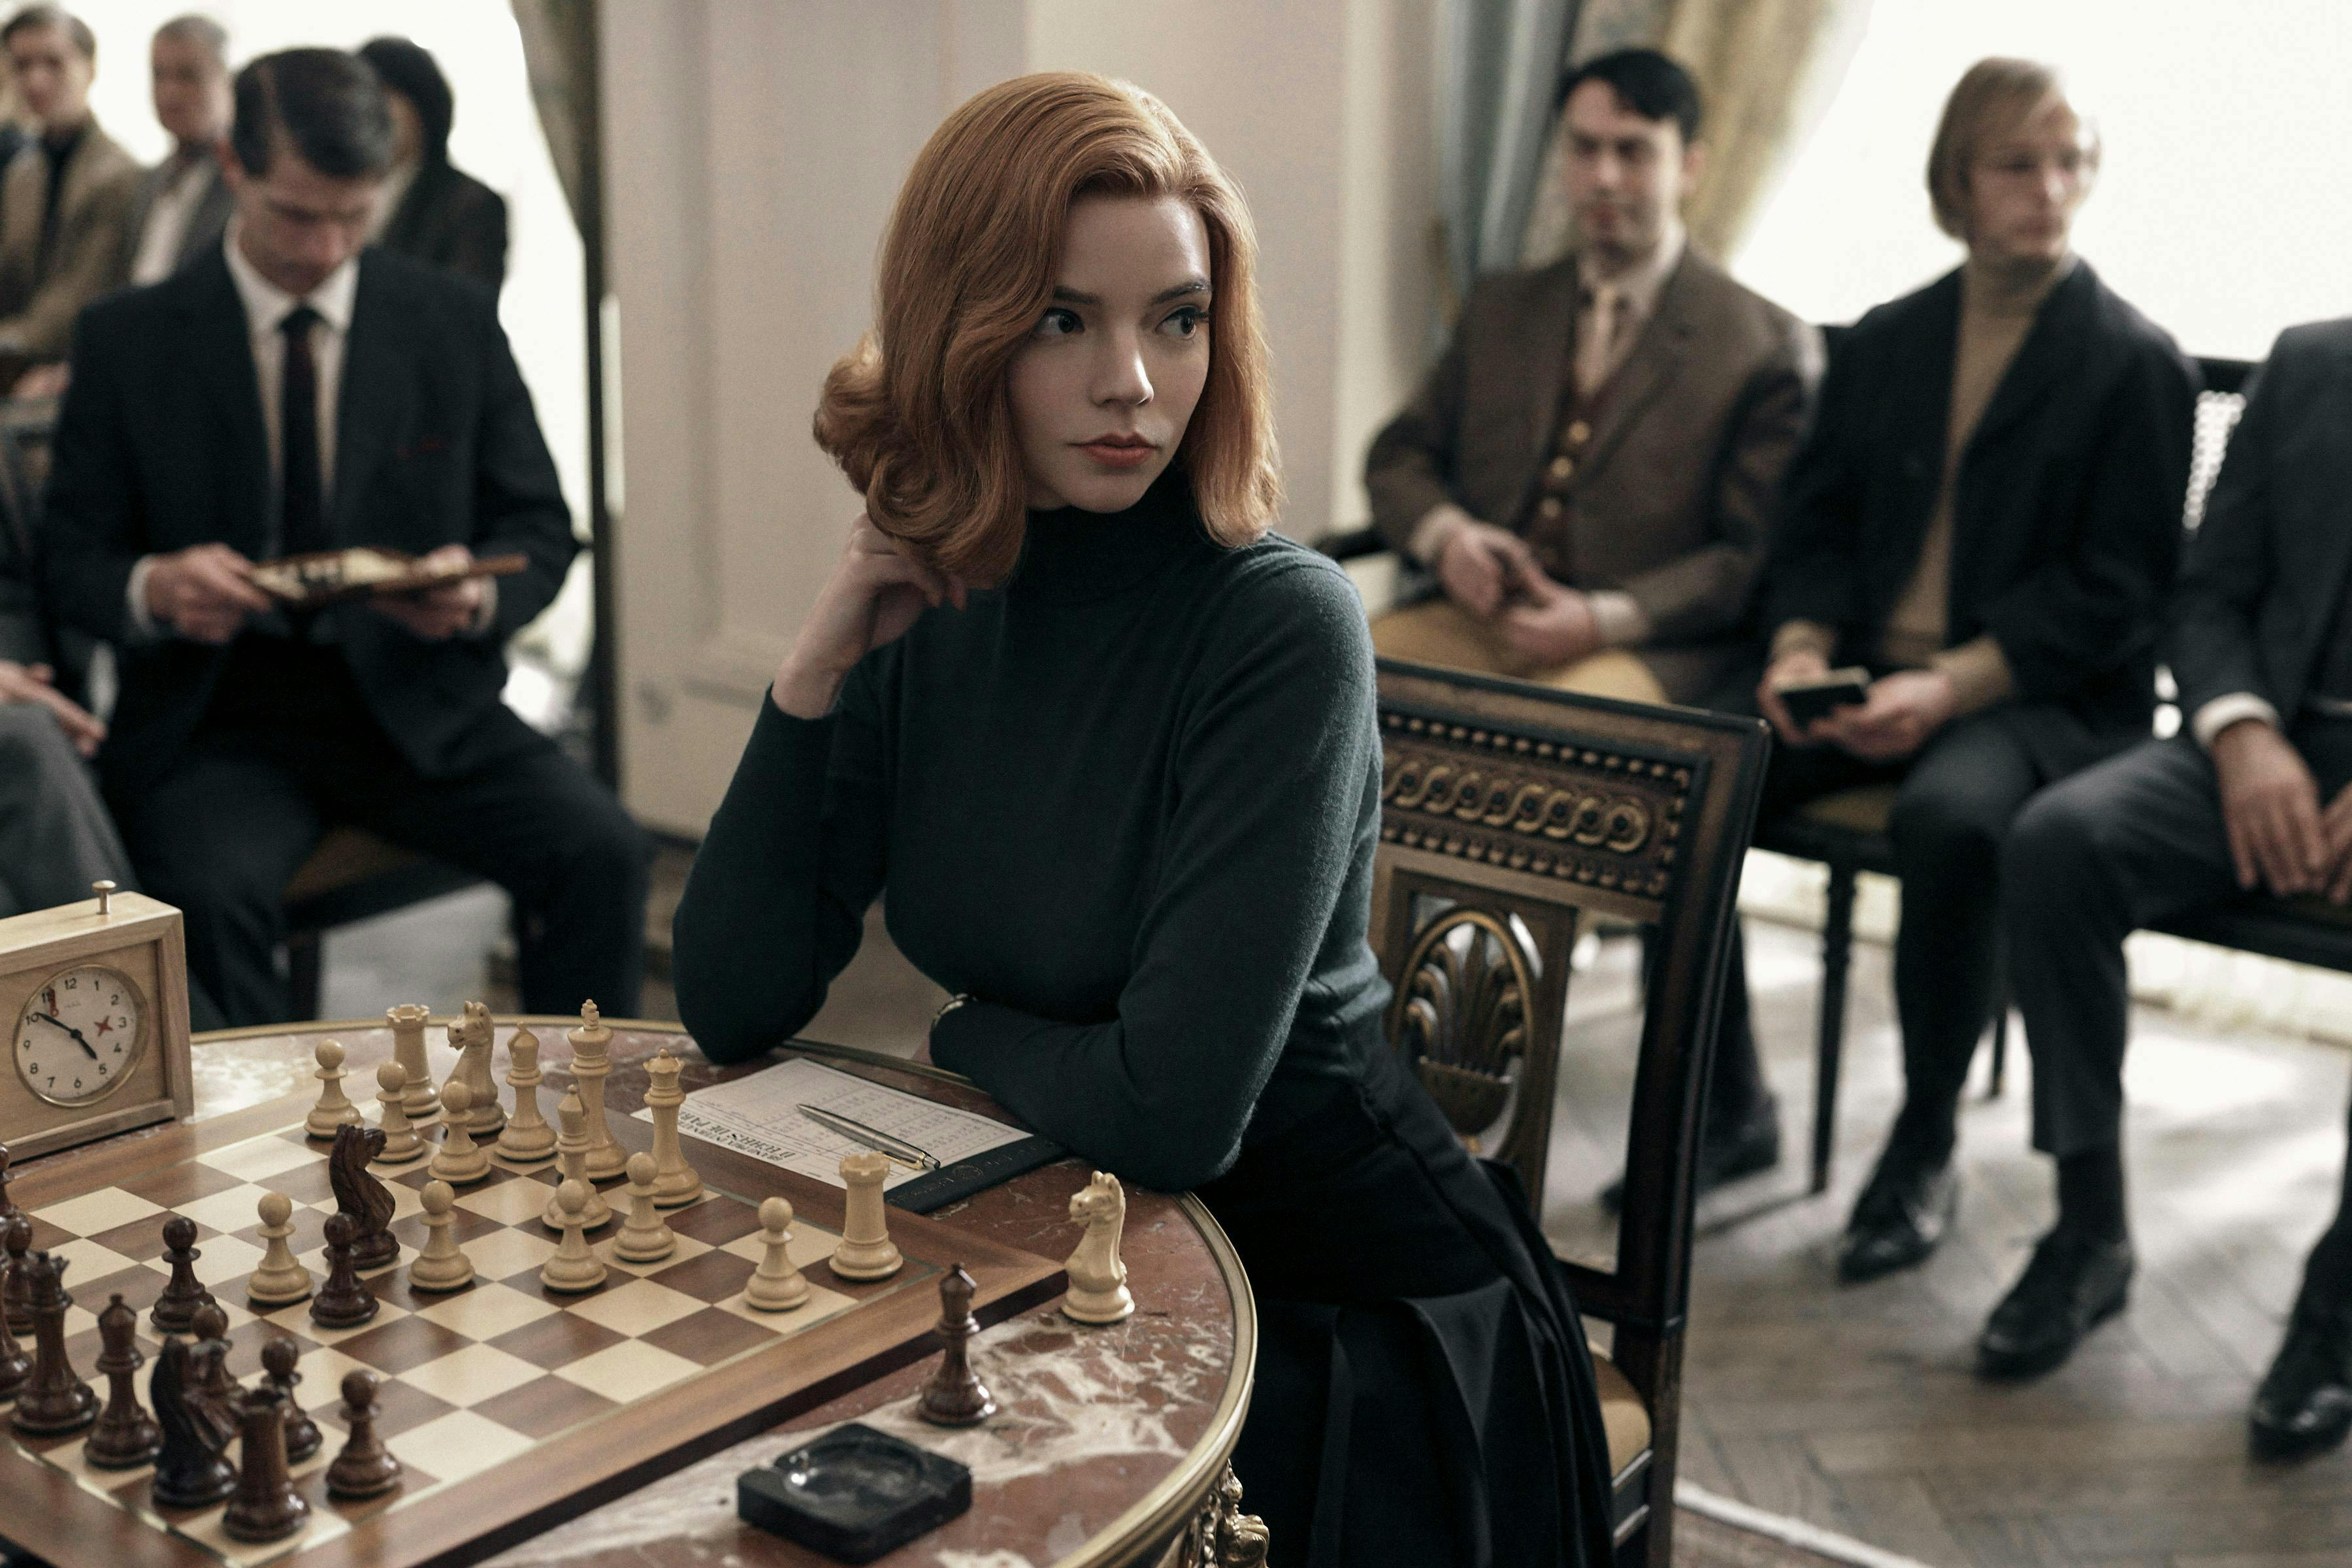 Anya Taylor-Joy as Beth Harmon in The Queen's Gambit playing chess